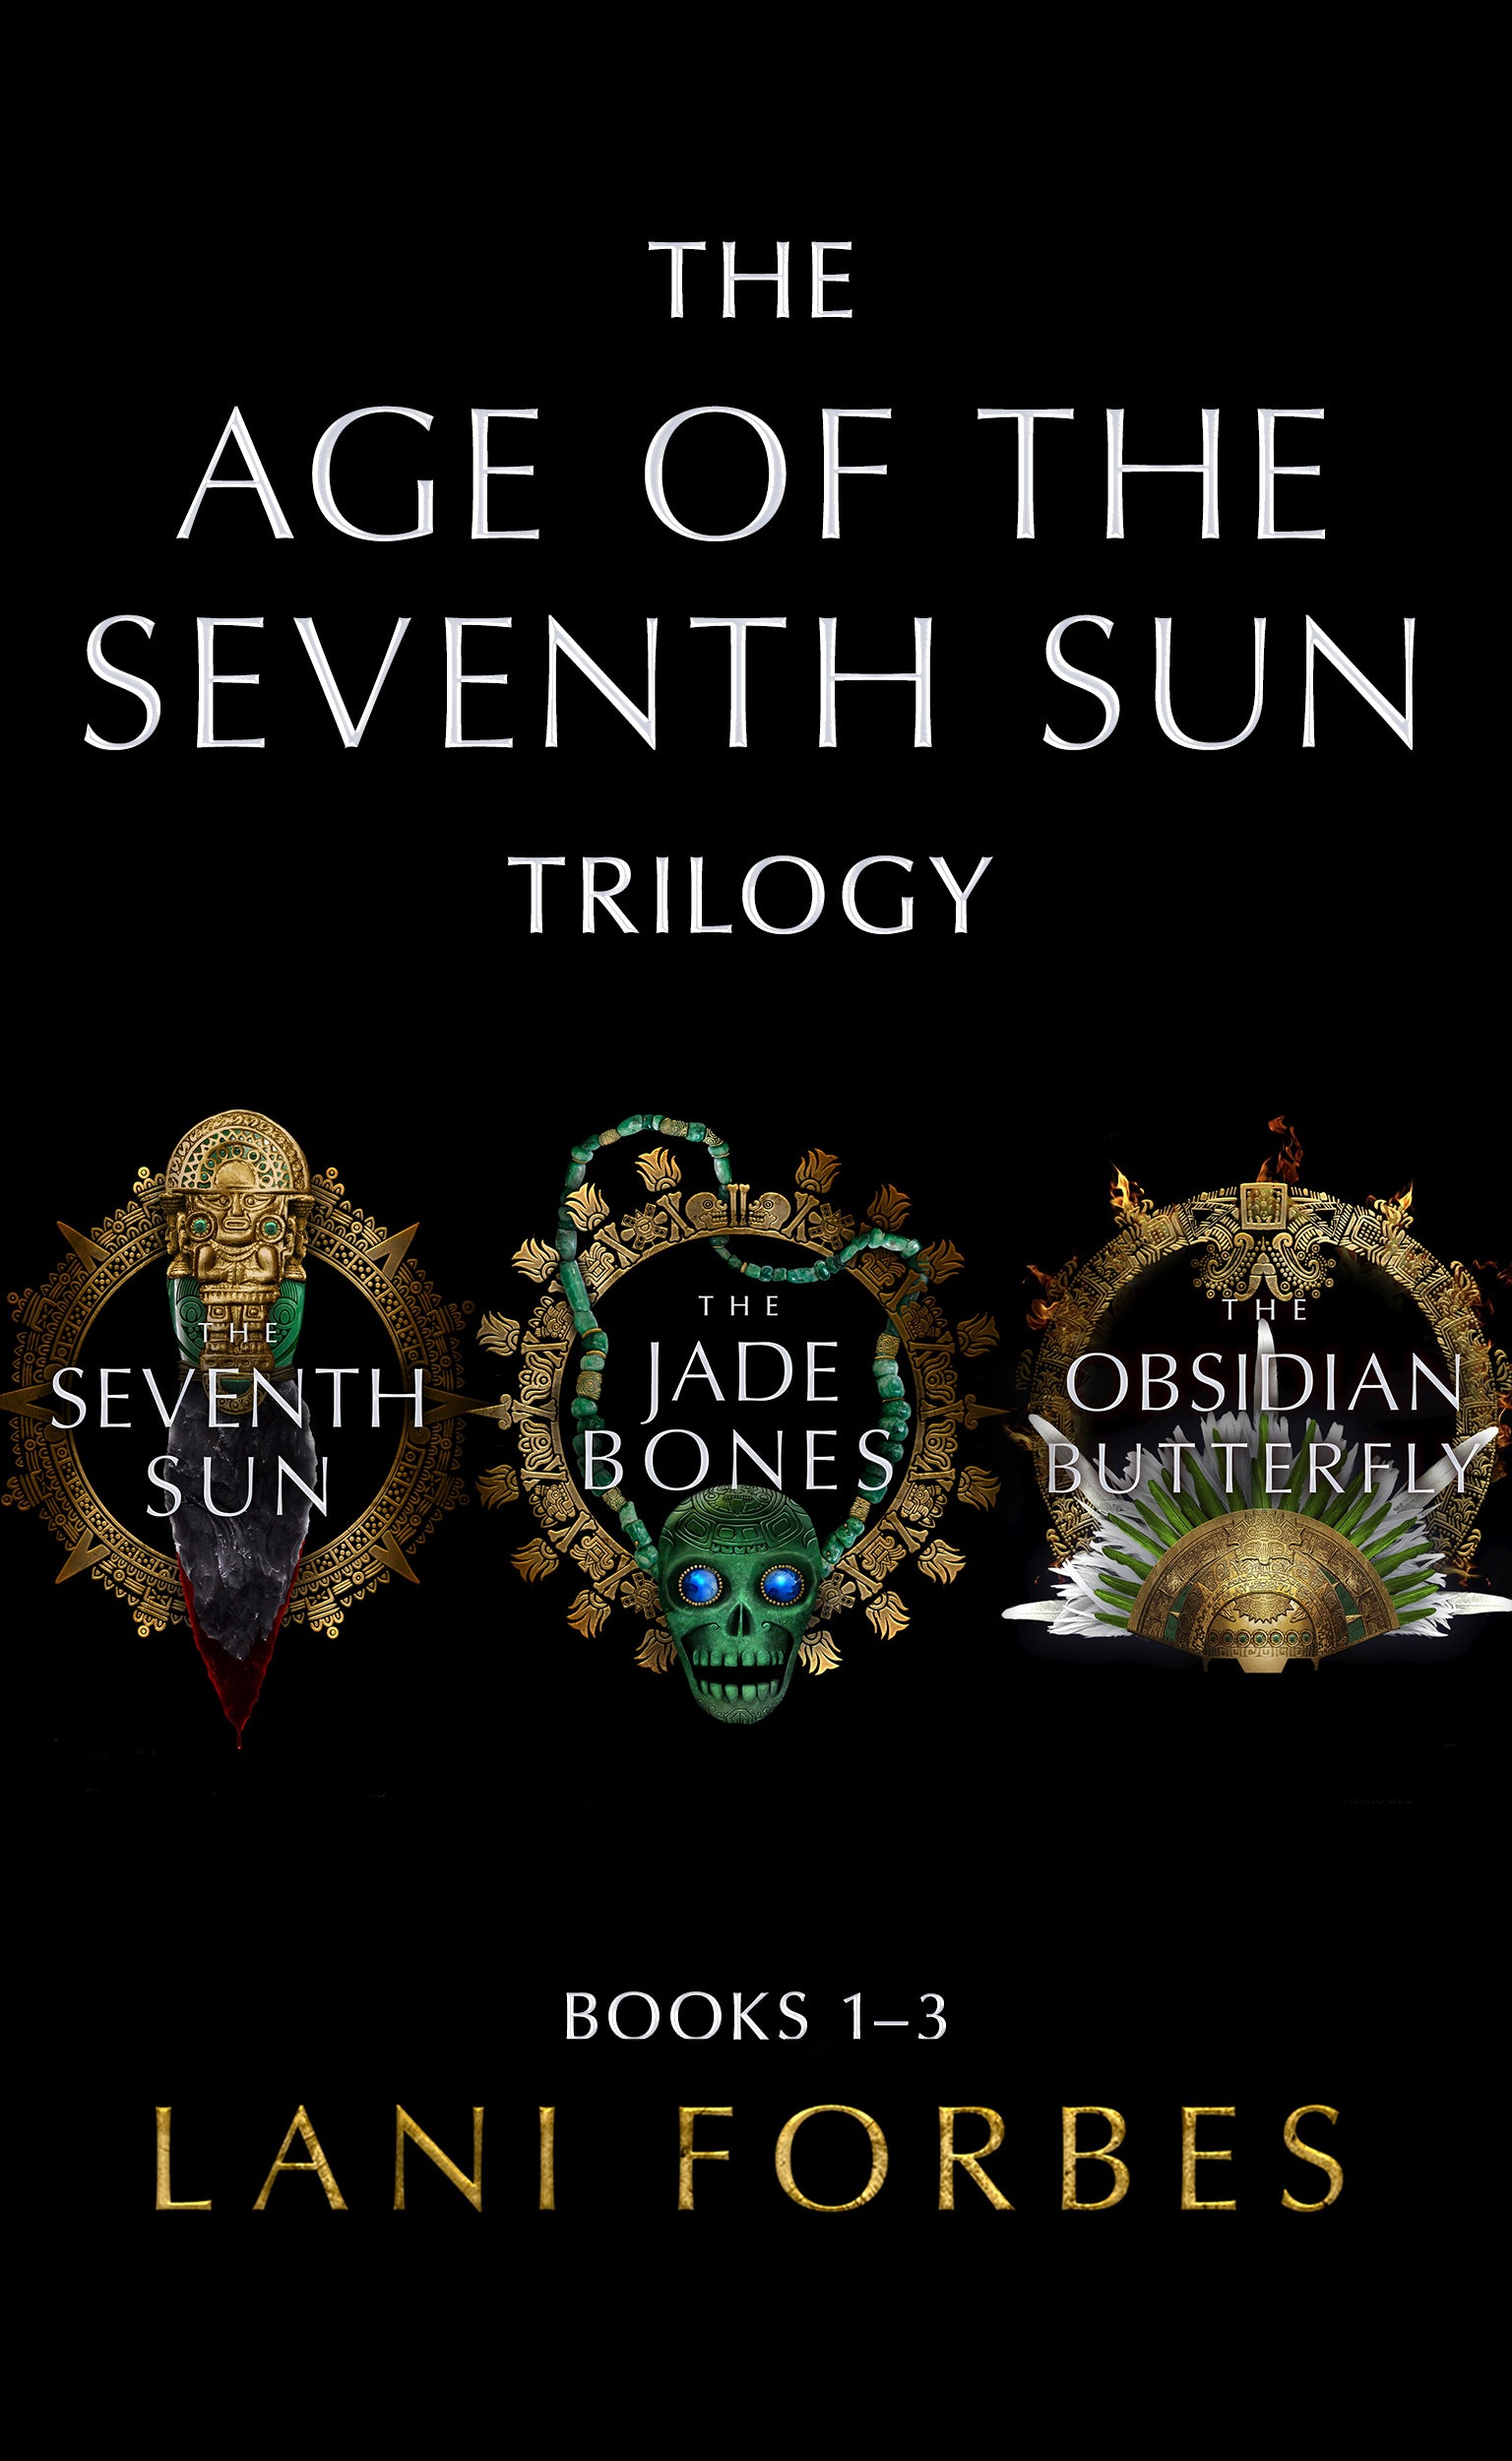 The Age of the Seventh Sun Trilogy